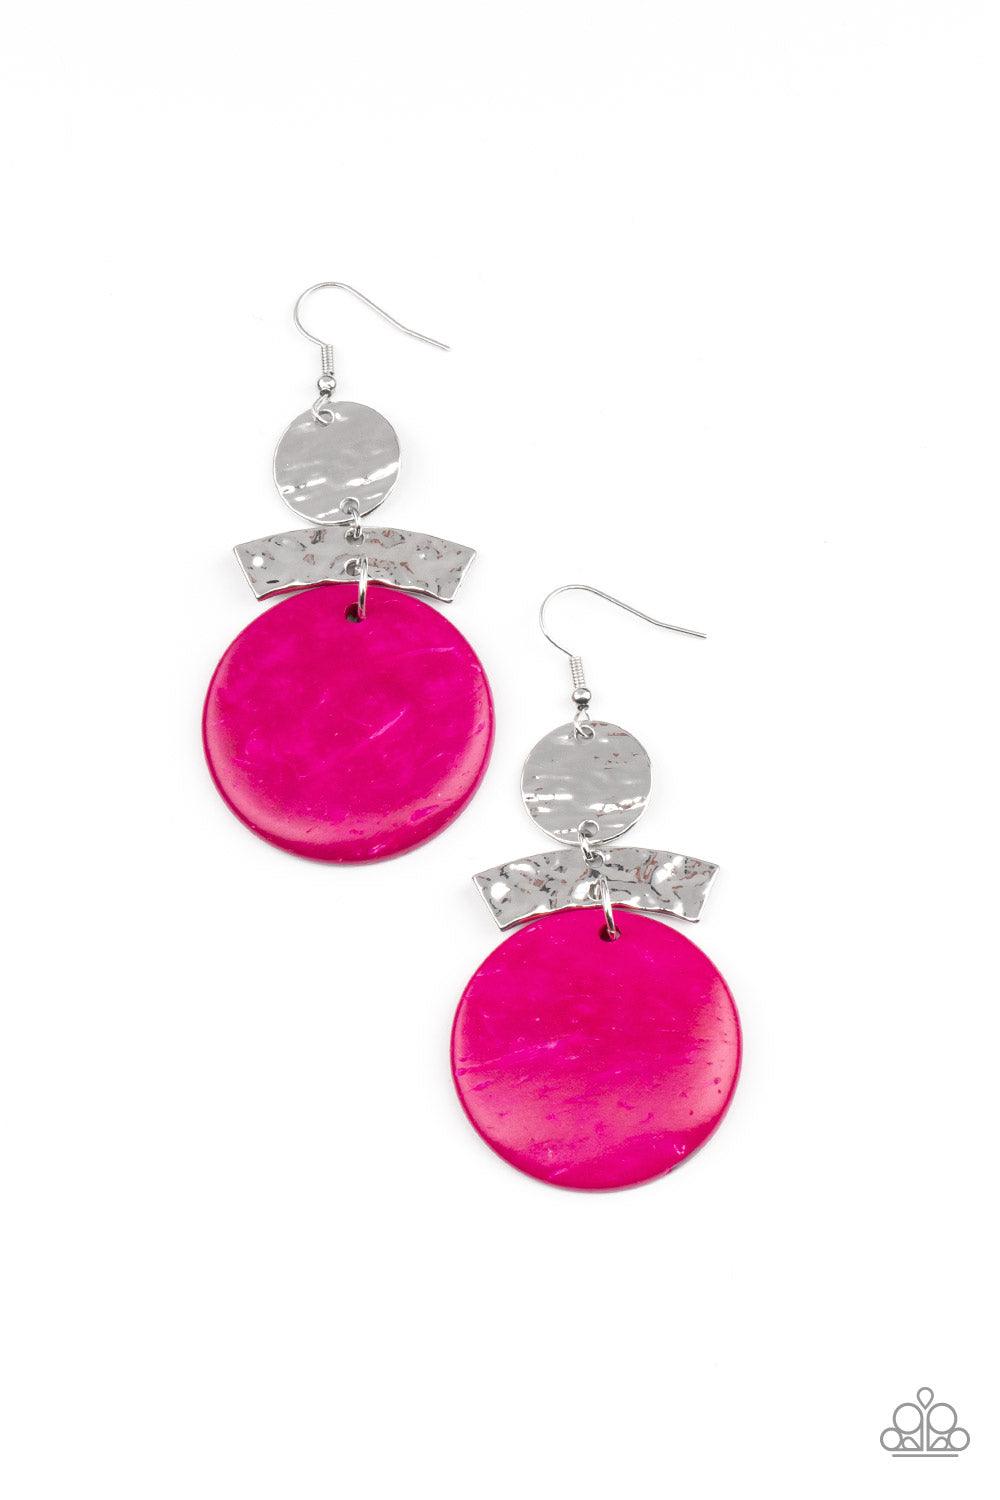 Paparazzi Accessories Diva Of My Domain - Pink Featuring a distressed pink finish, a wooden disc swings from the bottom of a hammered curved plate and hammered silver disc, coalescing into an earthy lure. Earring attaches to a standard fishhook fitting. S